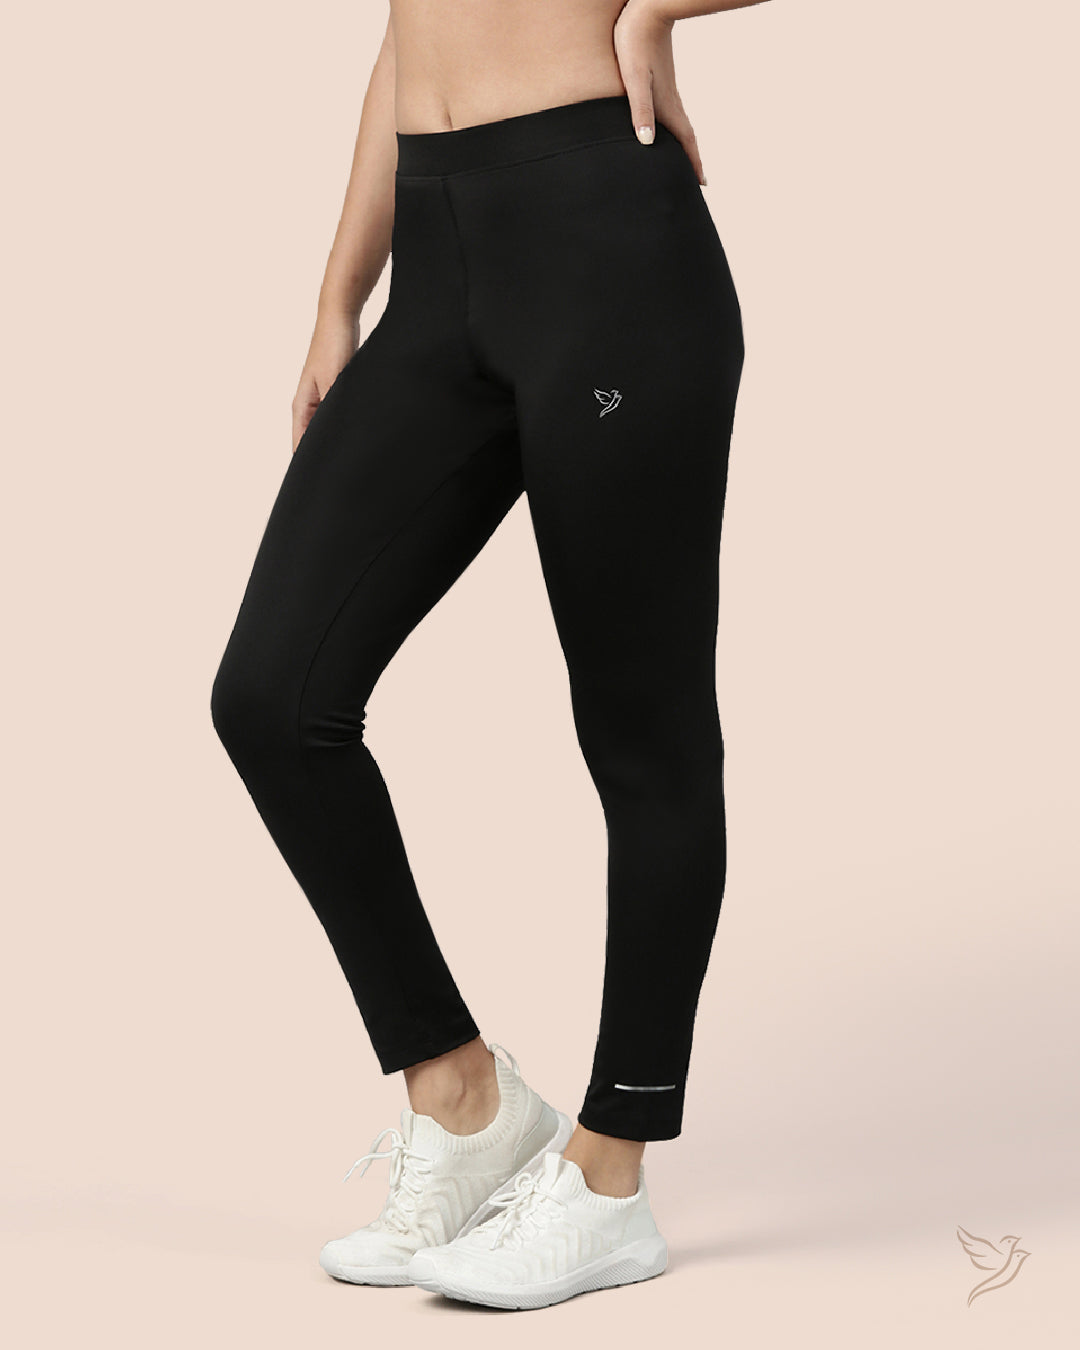 Black Performance Tights Mid Waist for Women